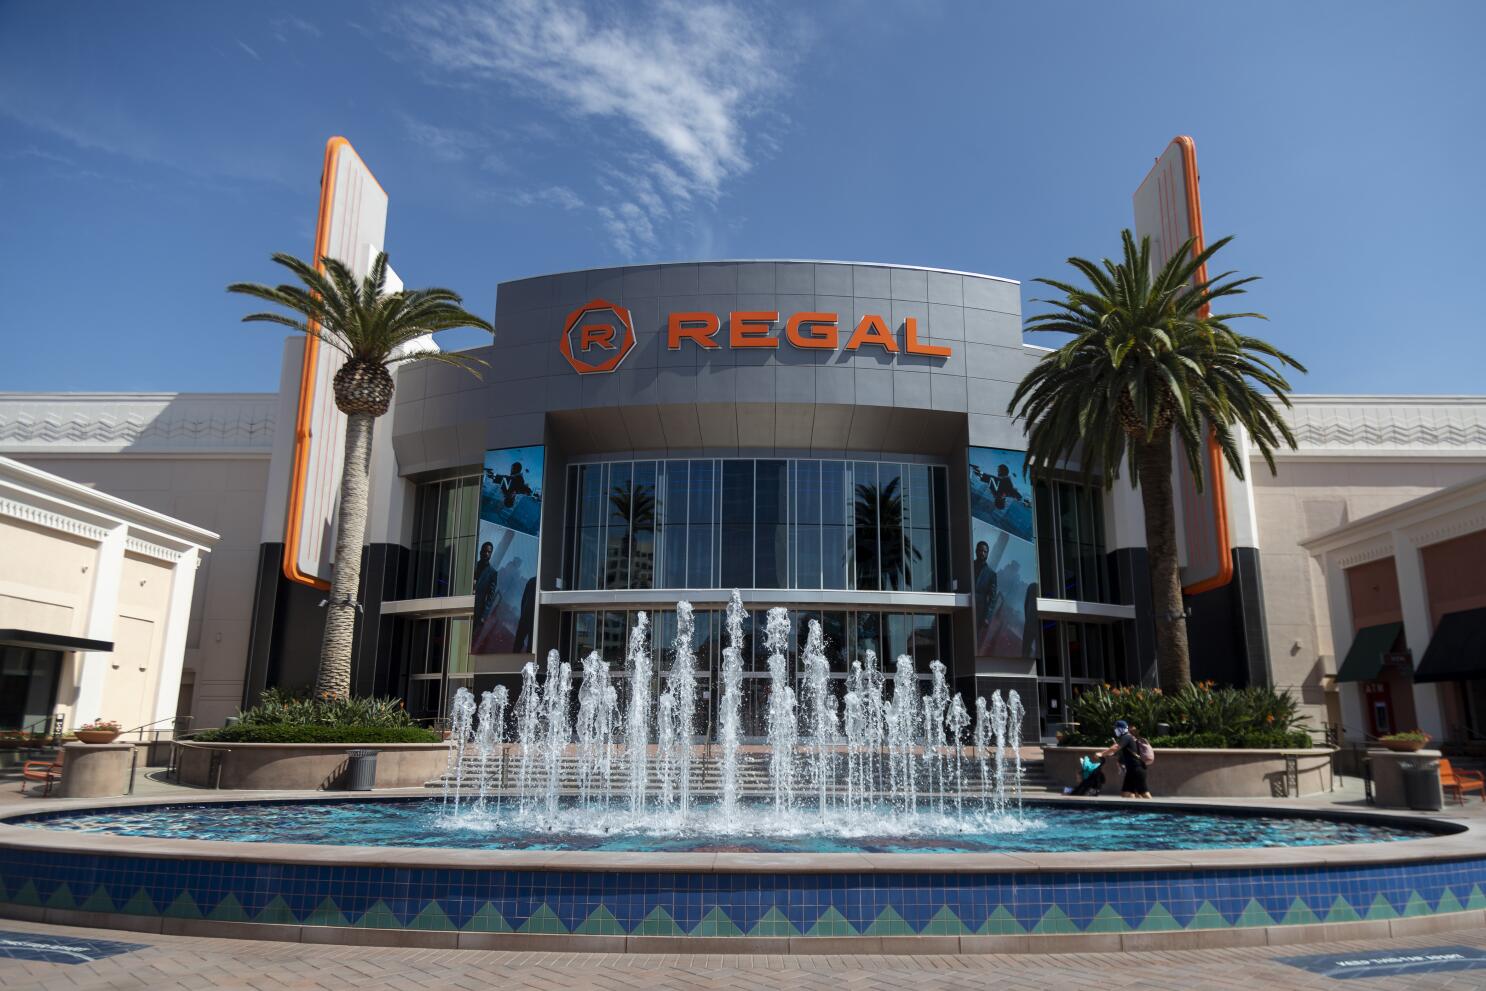 COVID: When will AMC, Regal, Regency, other movie theaters reopen?